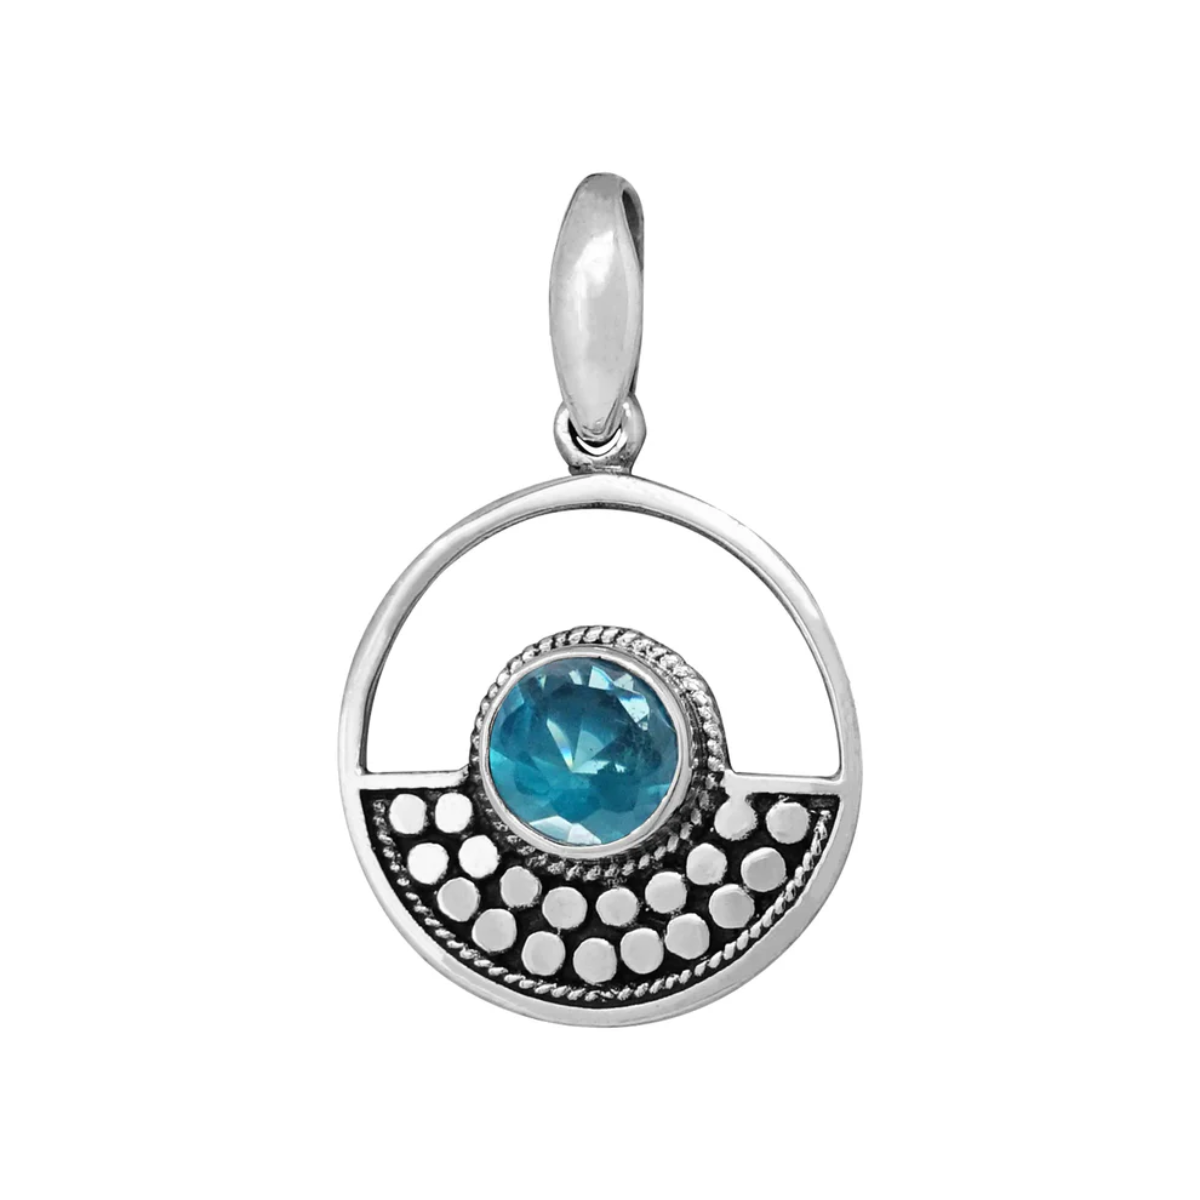 925 Sterling Silver pendant with a blue topaz inside. Full circle outline with a dotted bali design half circle within. The gemstone is a small circle in the middle of the whole design